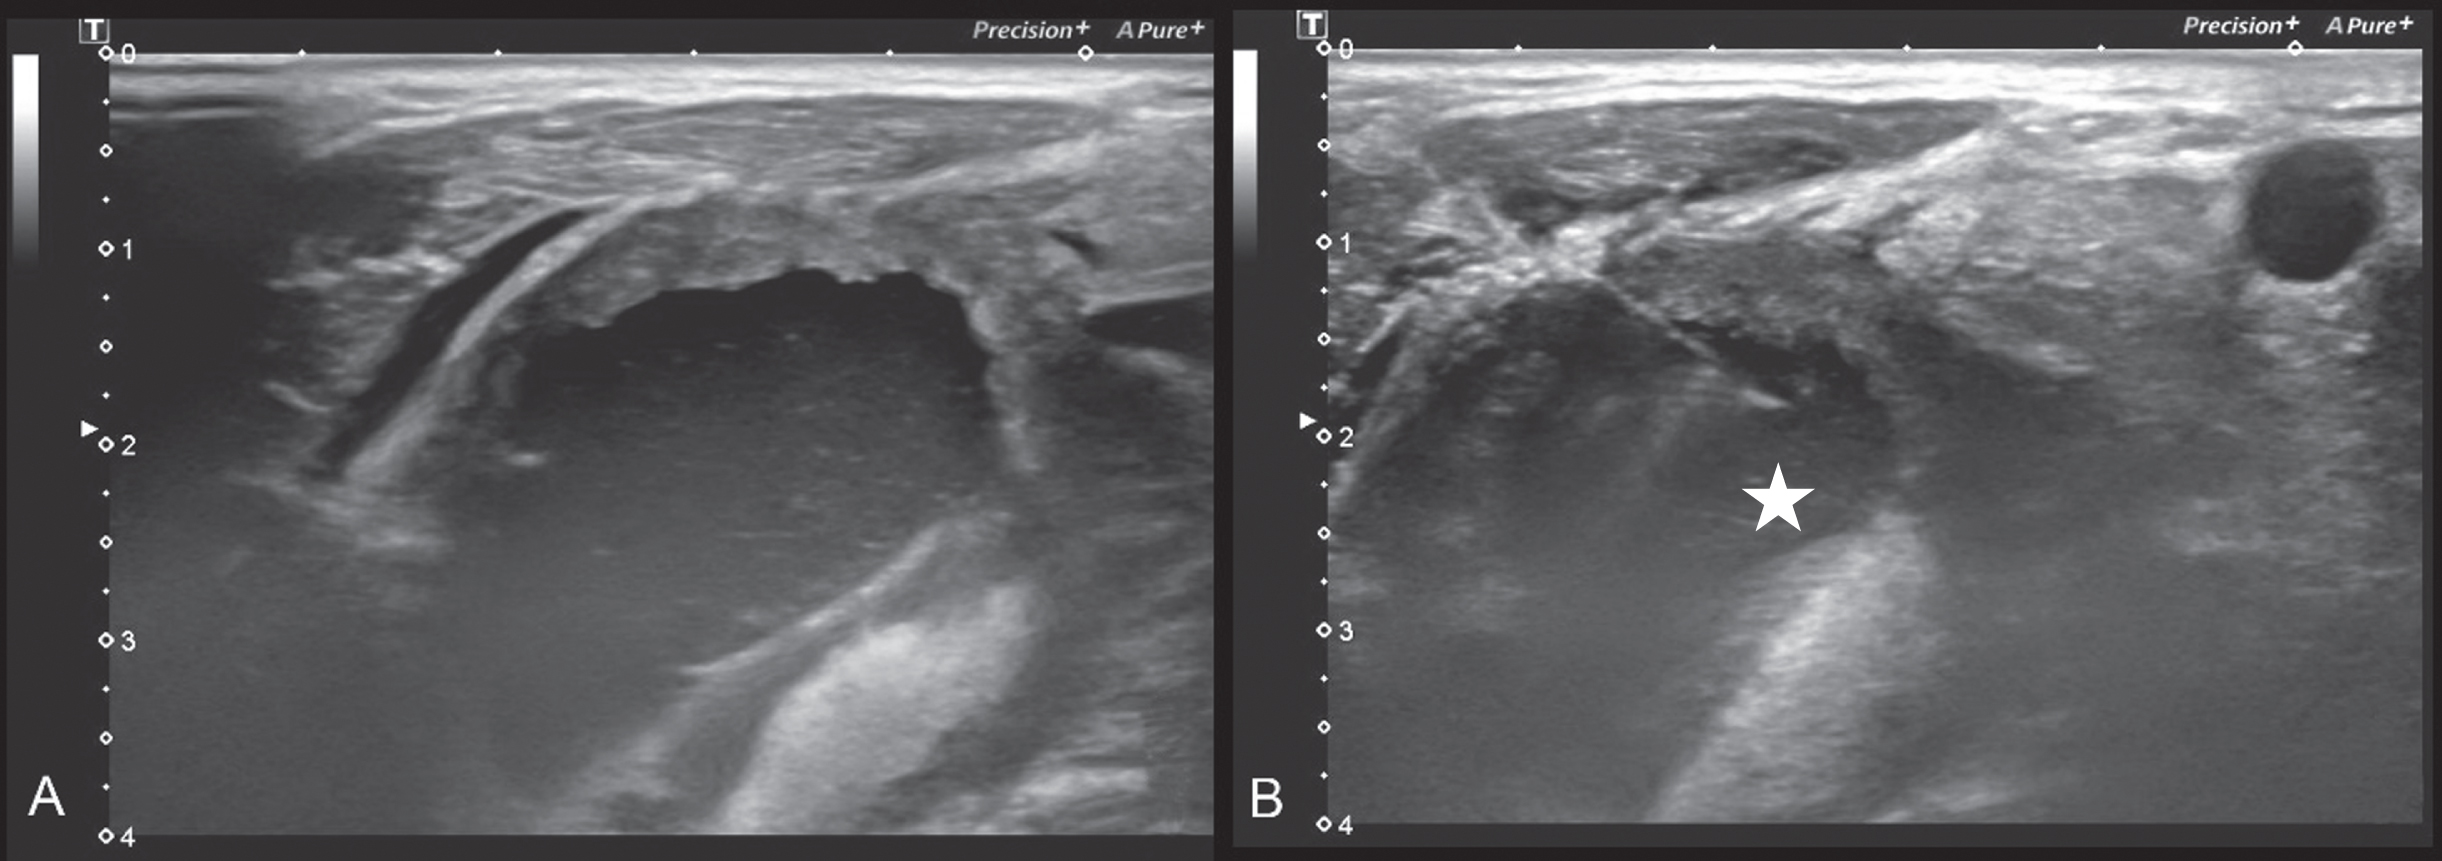 Images of a 66-years old patient with a large partial cystic lymph node metastasis on the right side in whom a US-CNB of the lesion was performed and a major bleeding occurred afterwards. Fig. 4 A and B demonstrate the B-Mode sonography of the lesion with the US-CNB placement in the solid rim of the lesion (marked with a white star (*)).